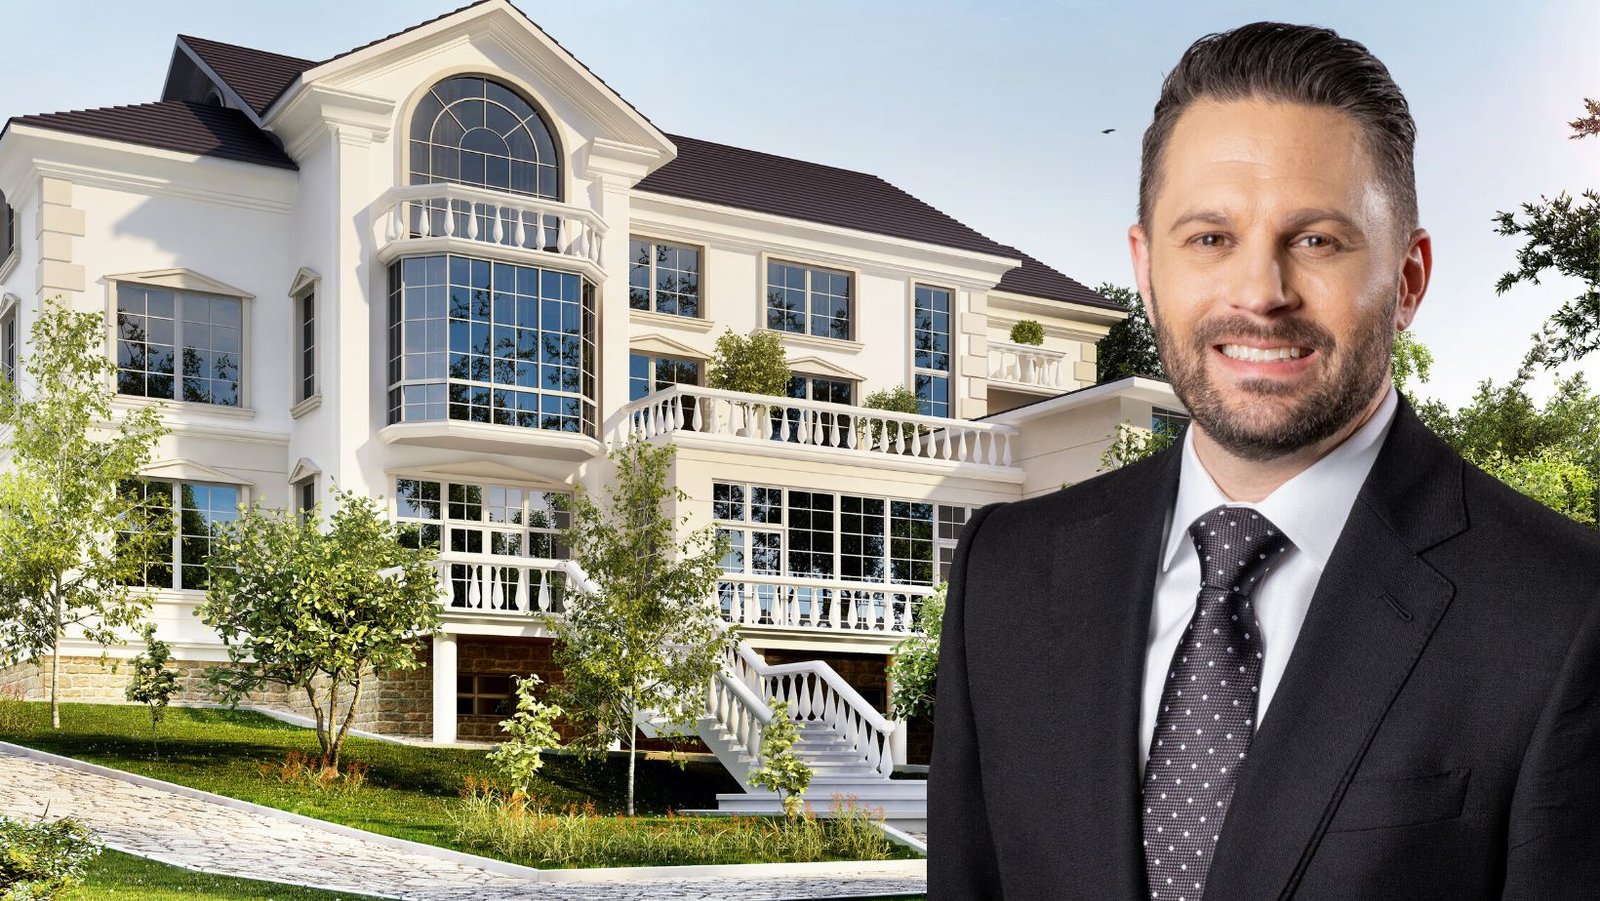 The Mansion Gabriel Swaggart House: A Look into the Lifestyle of a Prominent Evangelist